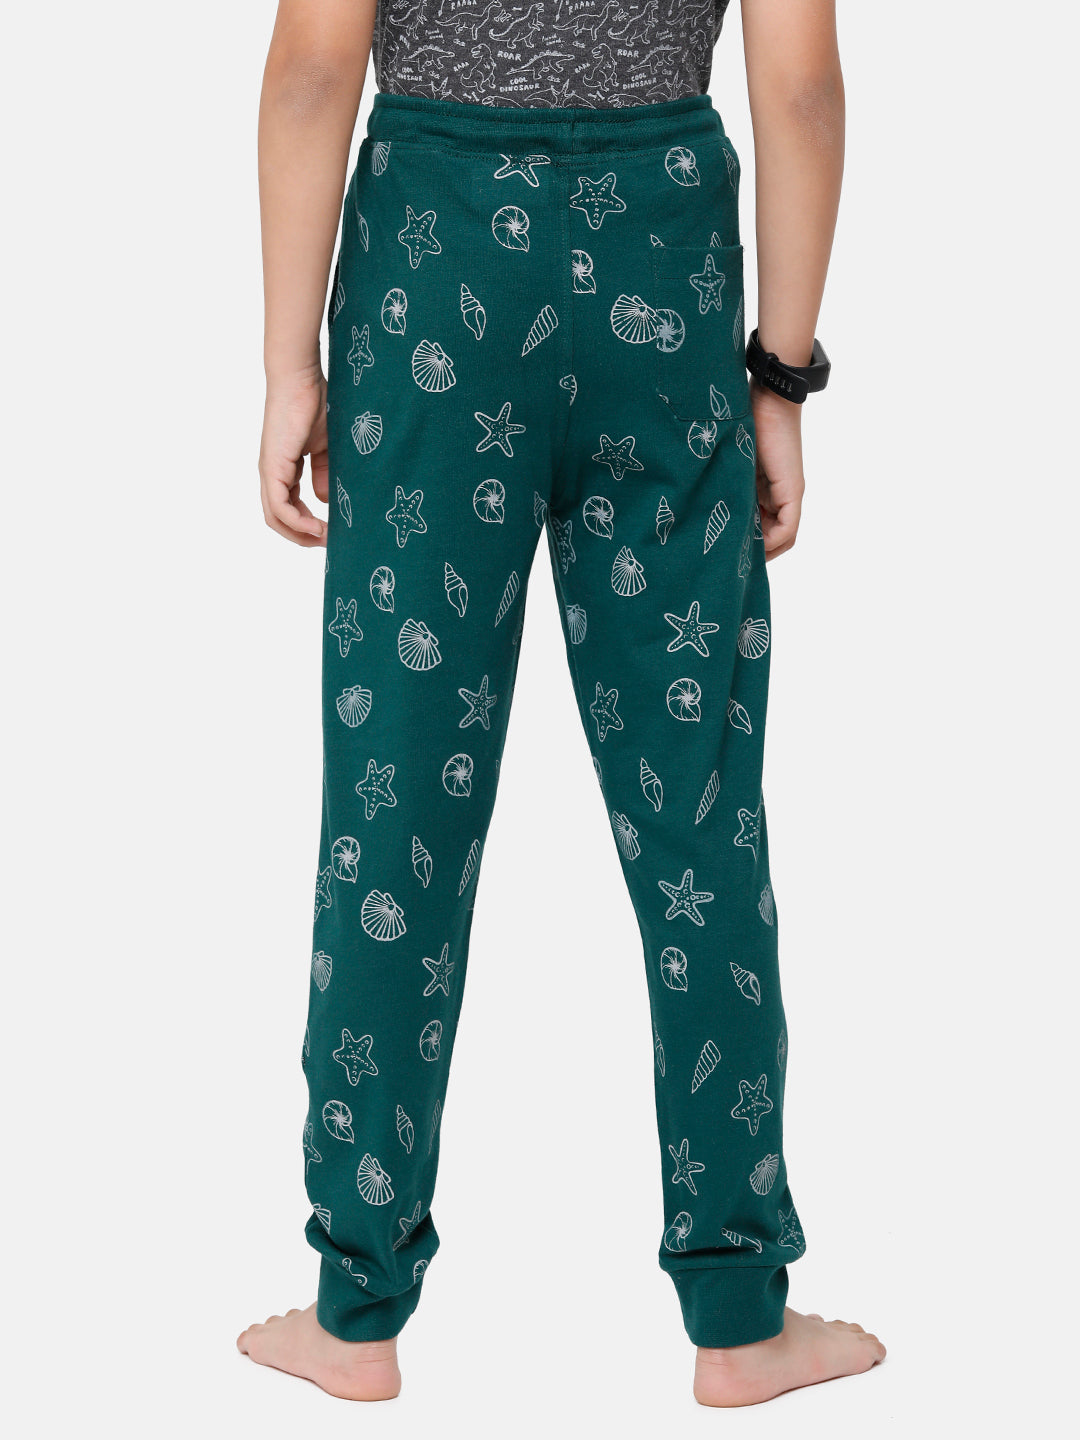 CP Boys Green Printed Slim Fit Track Pant Track Pants Classic Polo 